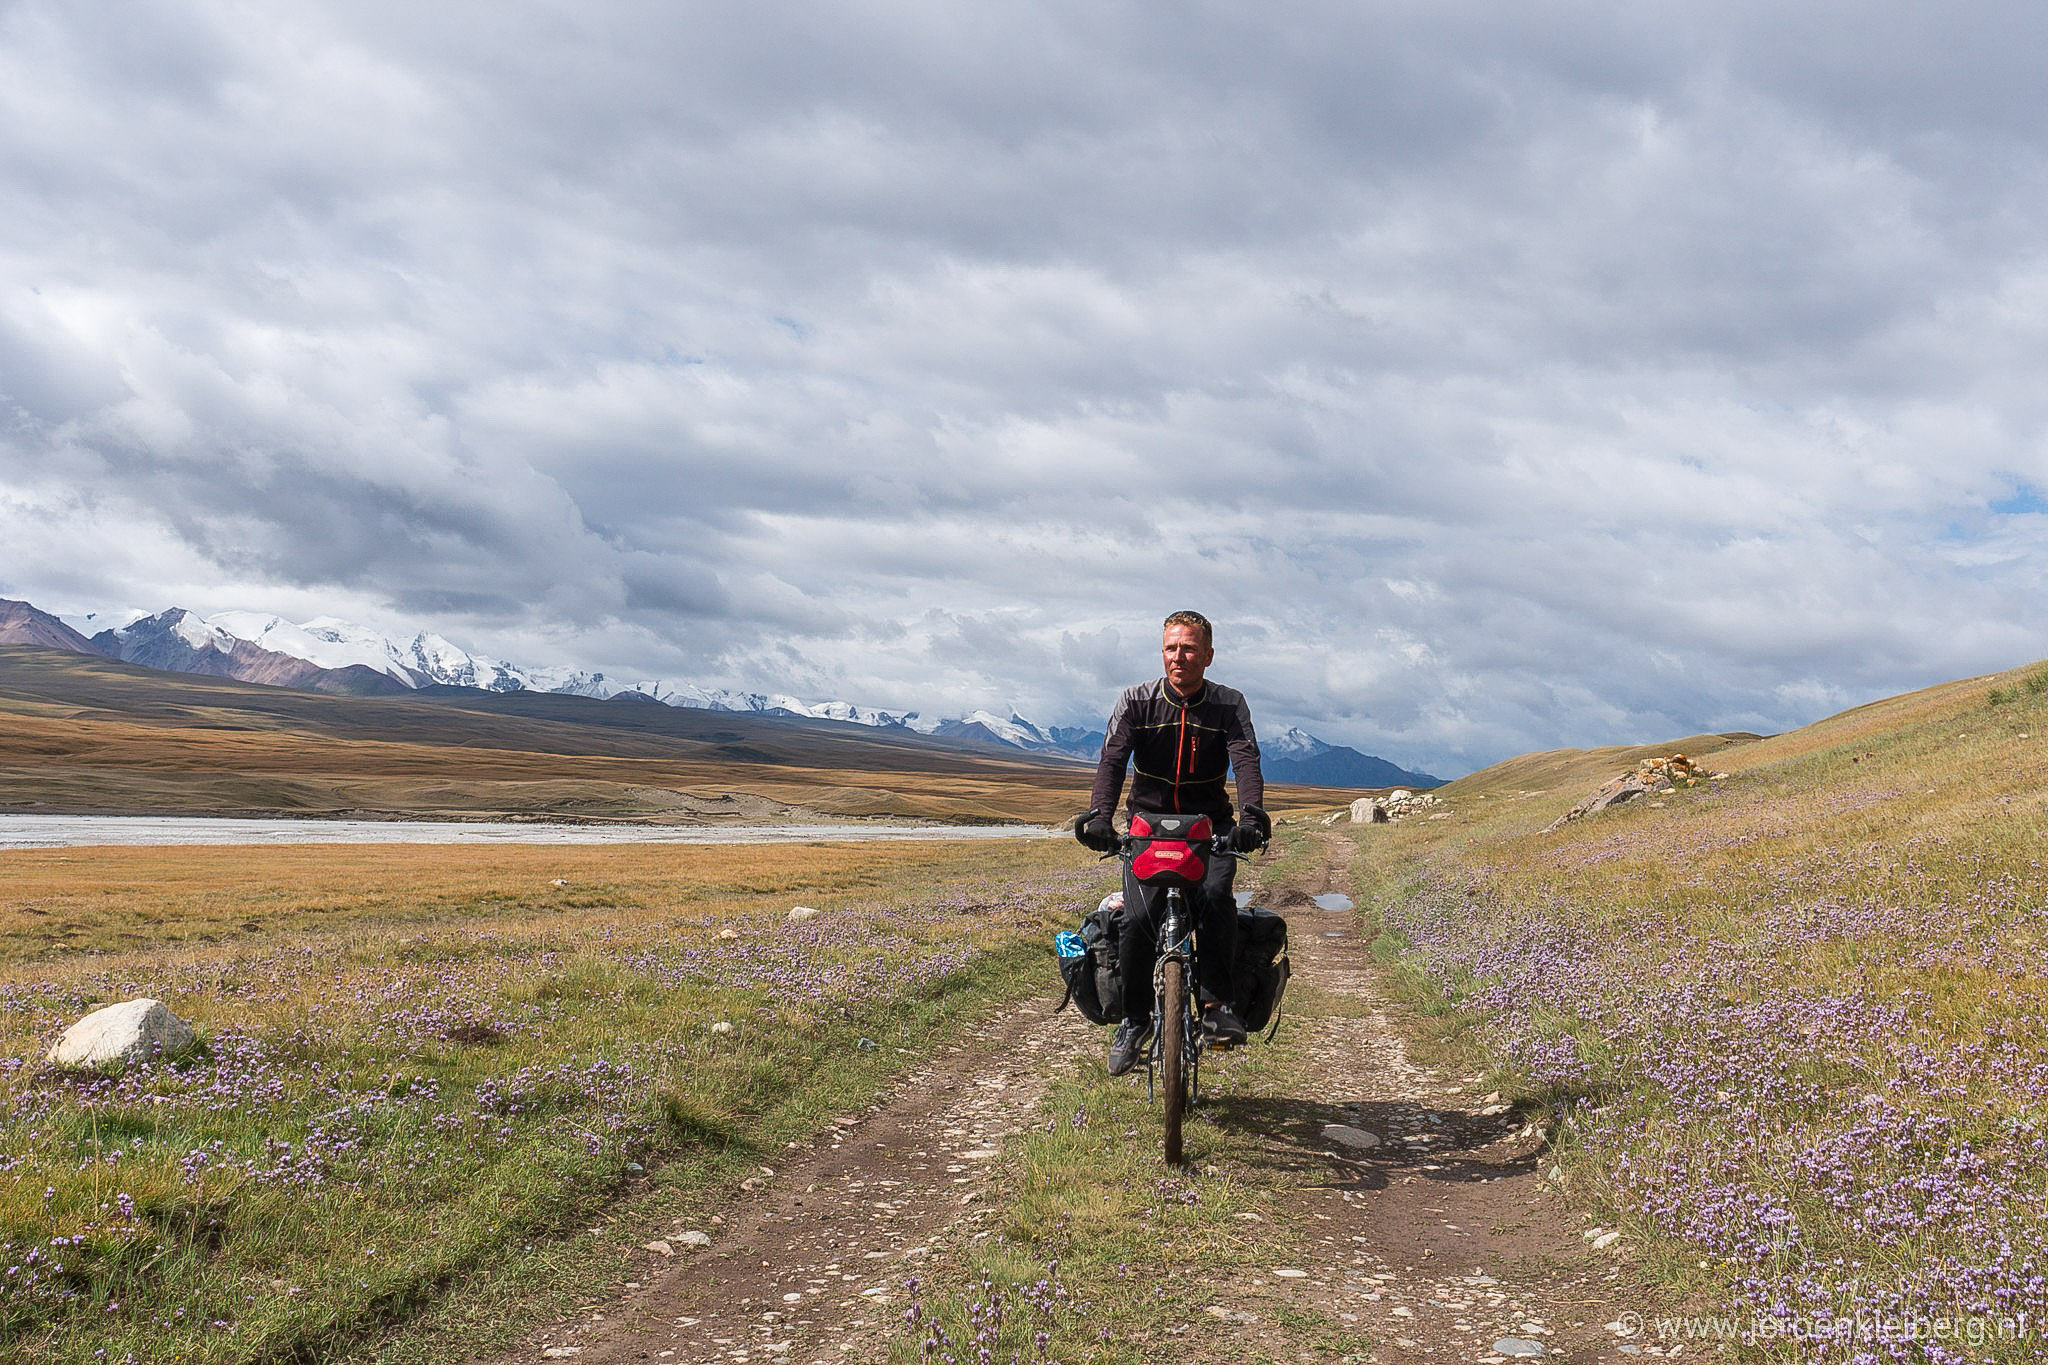 Cyclist on an unpaved road in the Tian Shan Mountains of eastern Kyrgyzstan